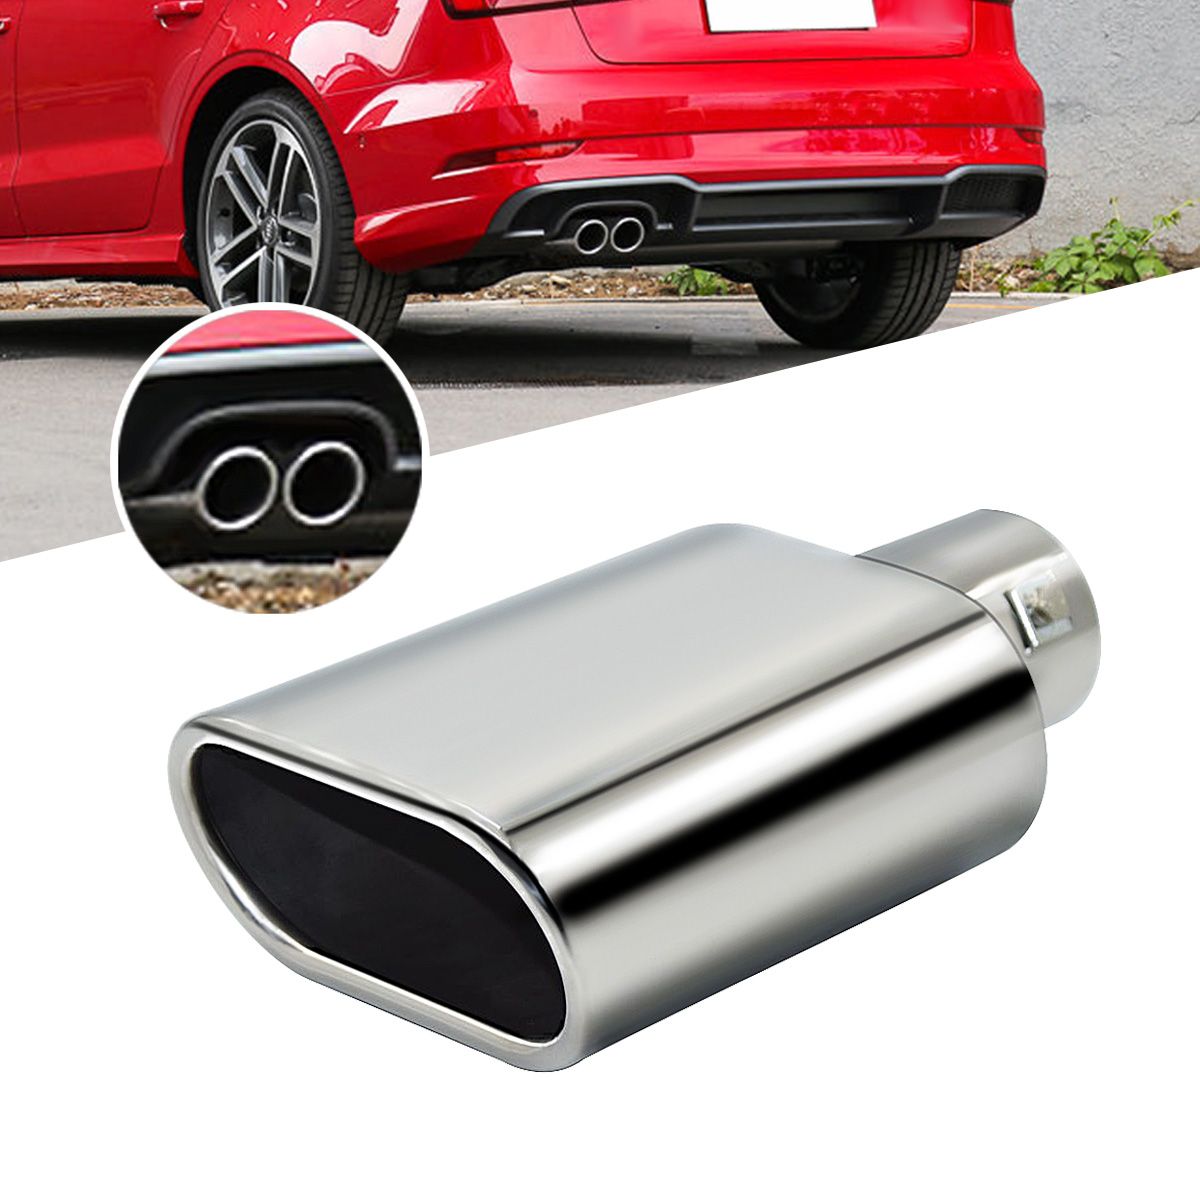 Universal-Car-Chrome-Stainless-Steel-Exhaust-Straight-Tail-Pipe-Tip-60mm-Inlet-1212491